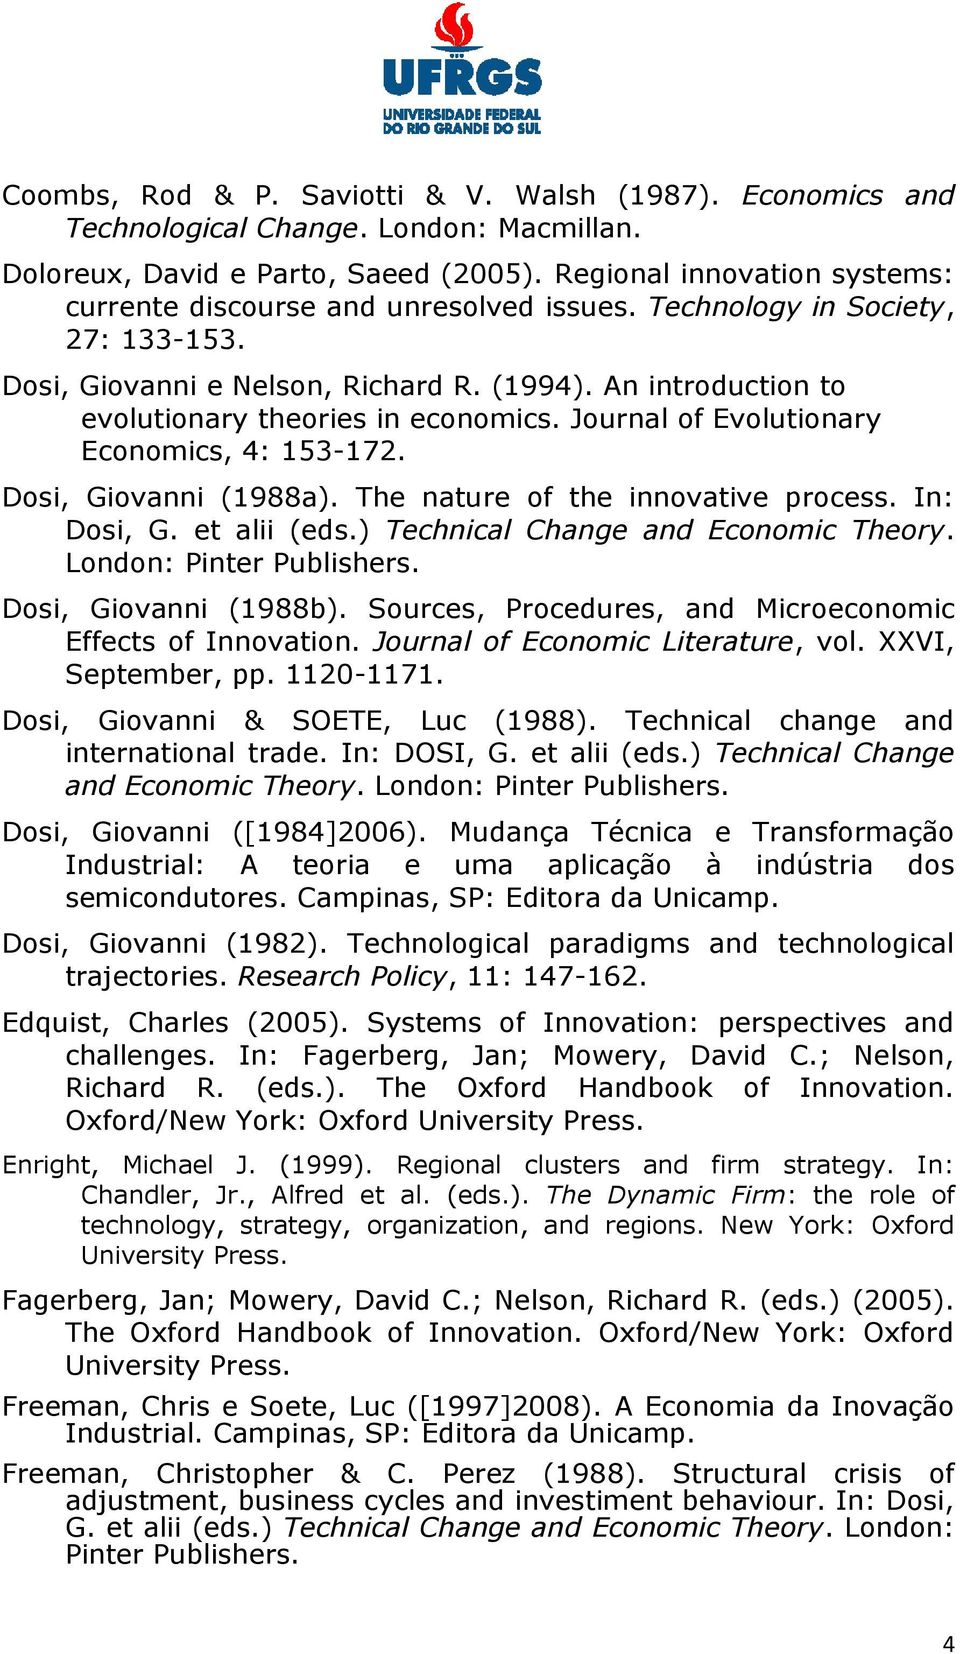 An introduction to evolutionary theories in economics. Journal of Evolutionary Economics, 4: 153-172. Dosi, Giovanni (1988a). The nature of the innovative process. In: Dosi, G. et alii (eds.